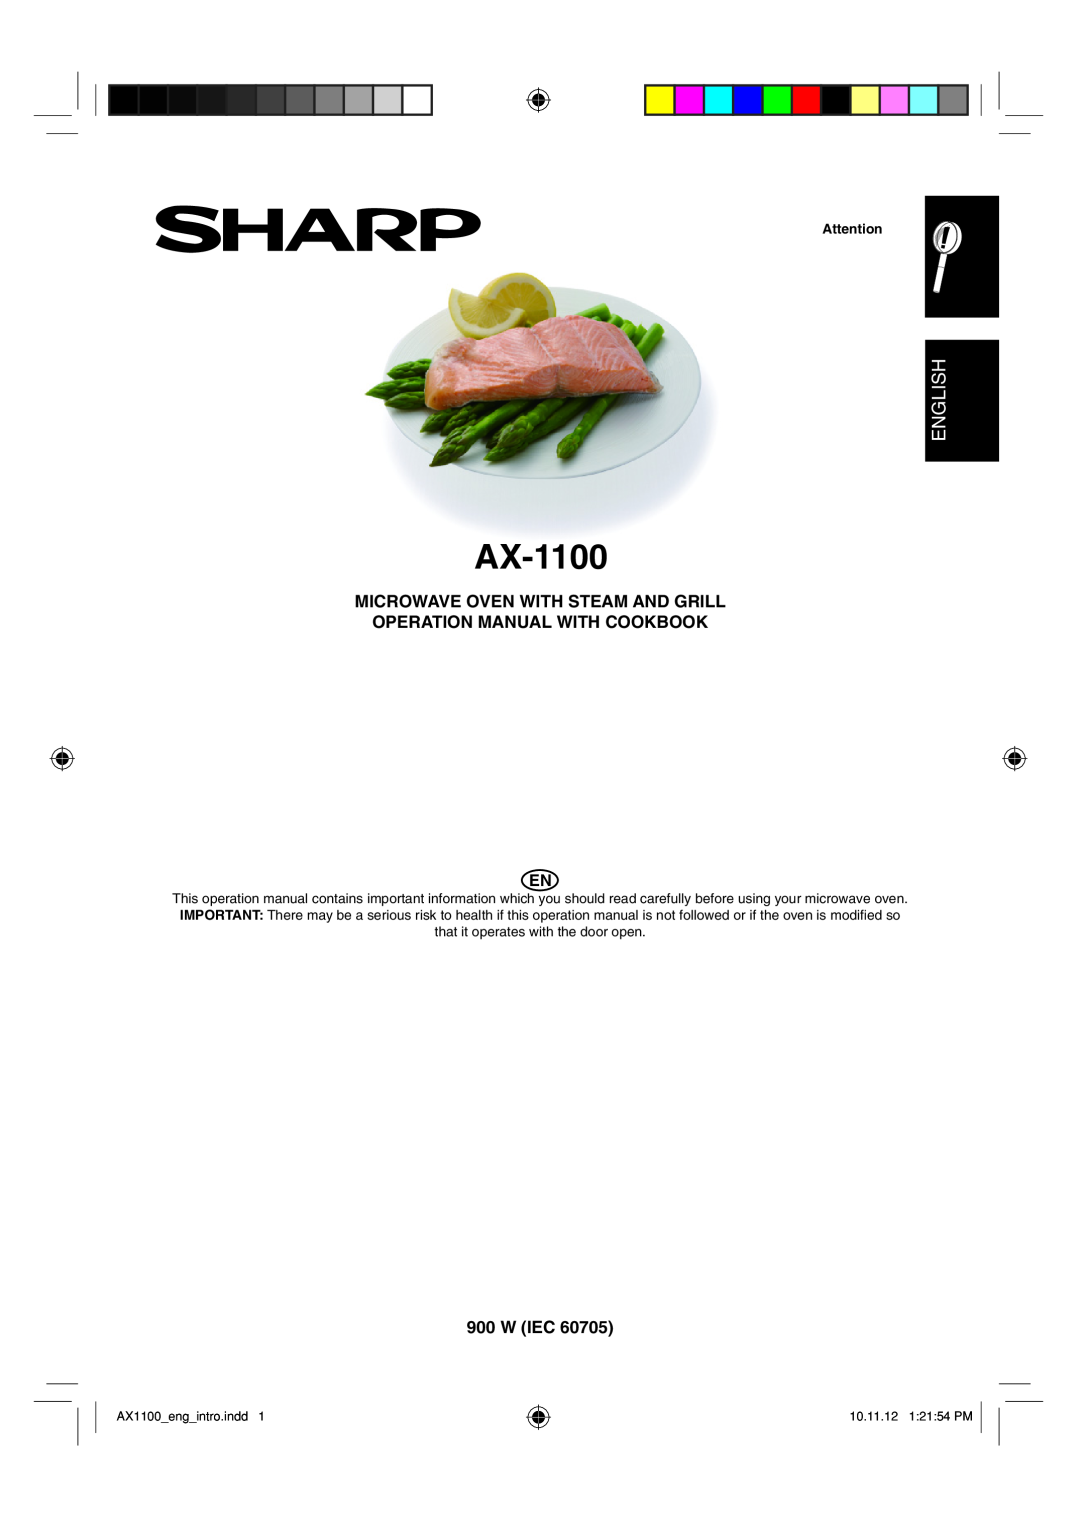 Sharp AX-1100 operation manual English, Microwave Oven With Steam And Grill Operation Manual With Cookbook, W Iec 